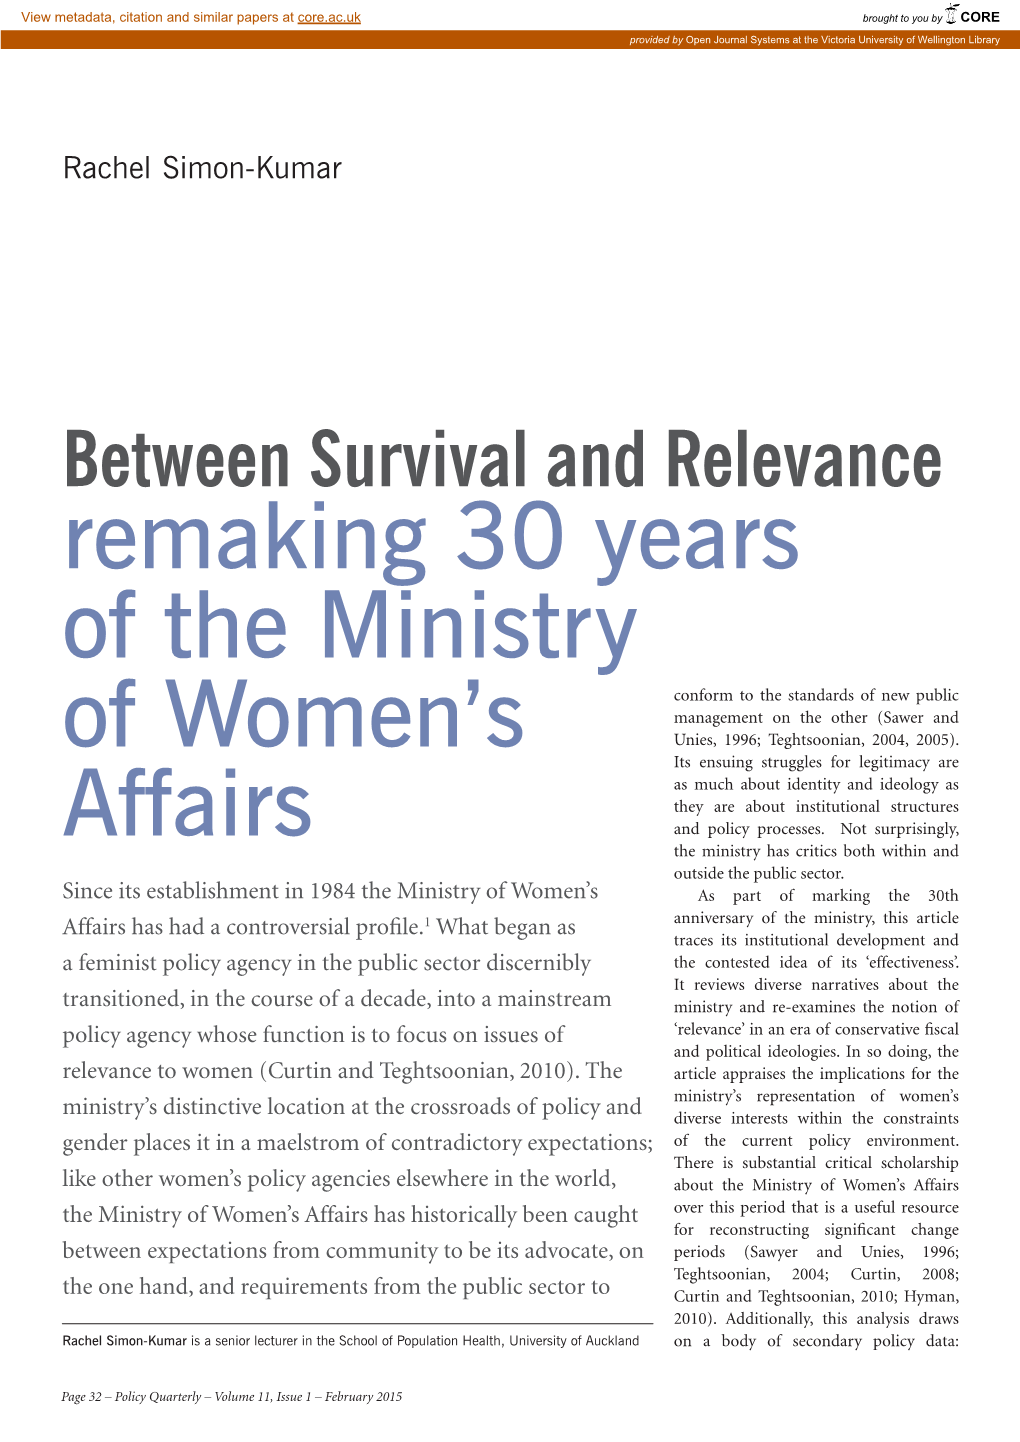 Remaking 30 Years of the Ministry of Women's Affairs